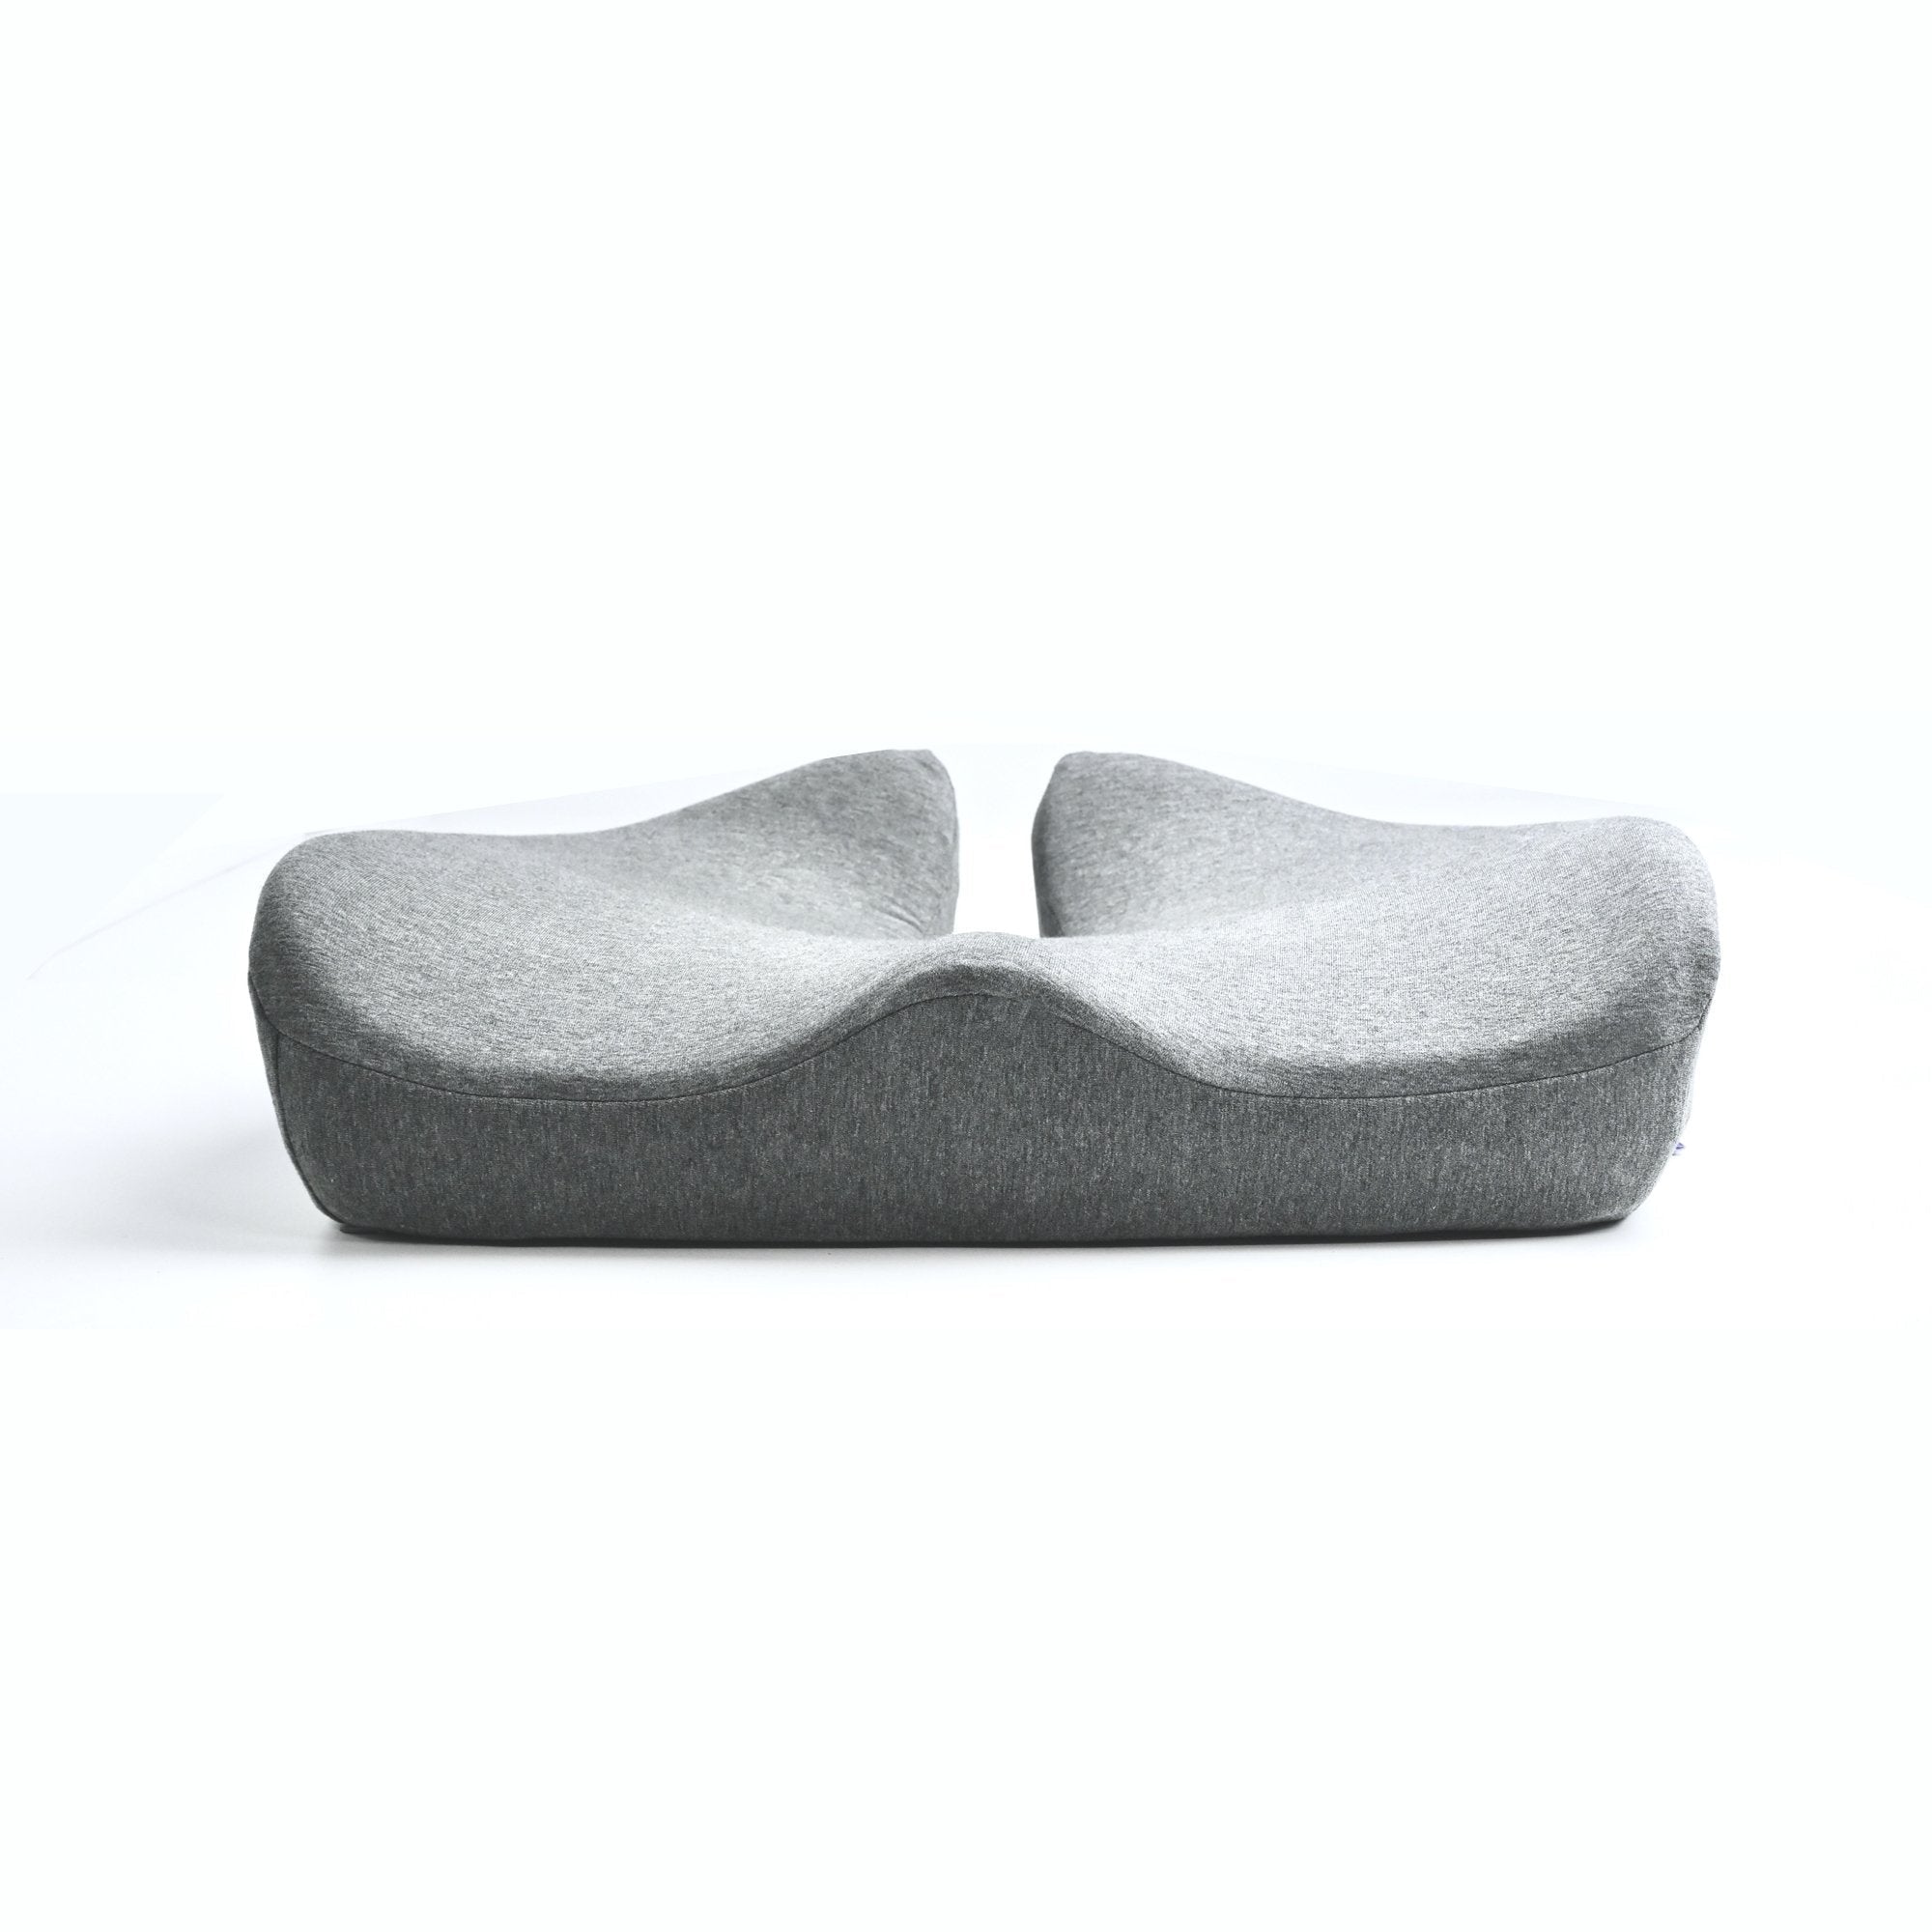 Cushion Lab Patented Pressure Relief Seat Cushion for Long Sitting Hours on  Office & Home Chair 